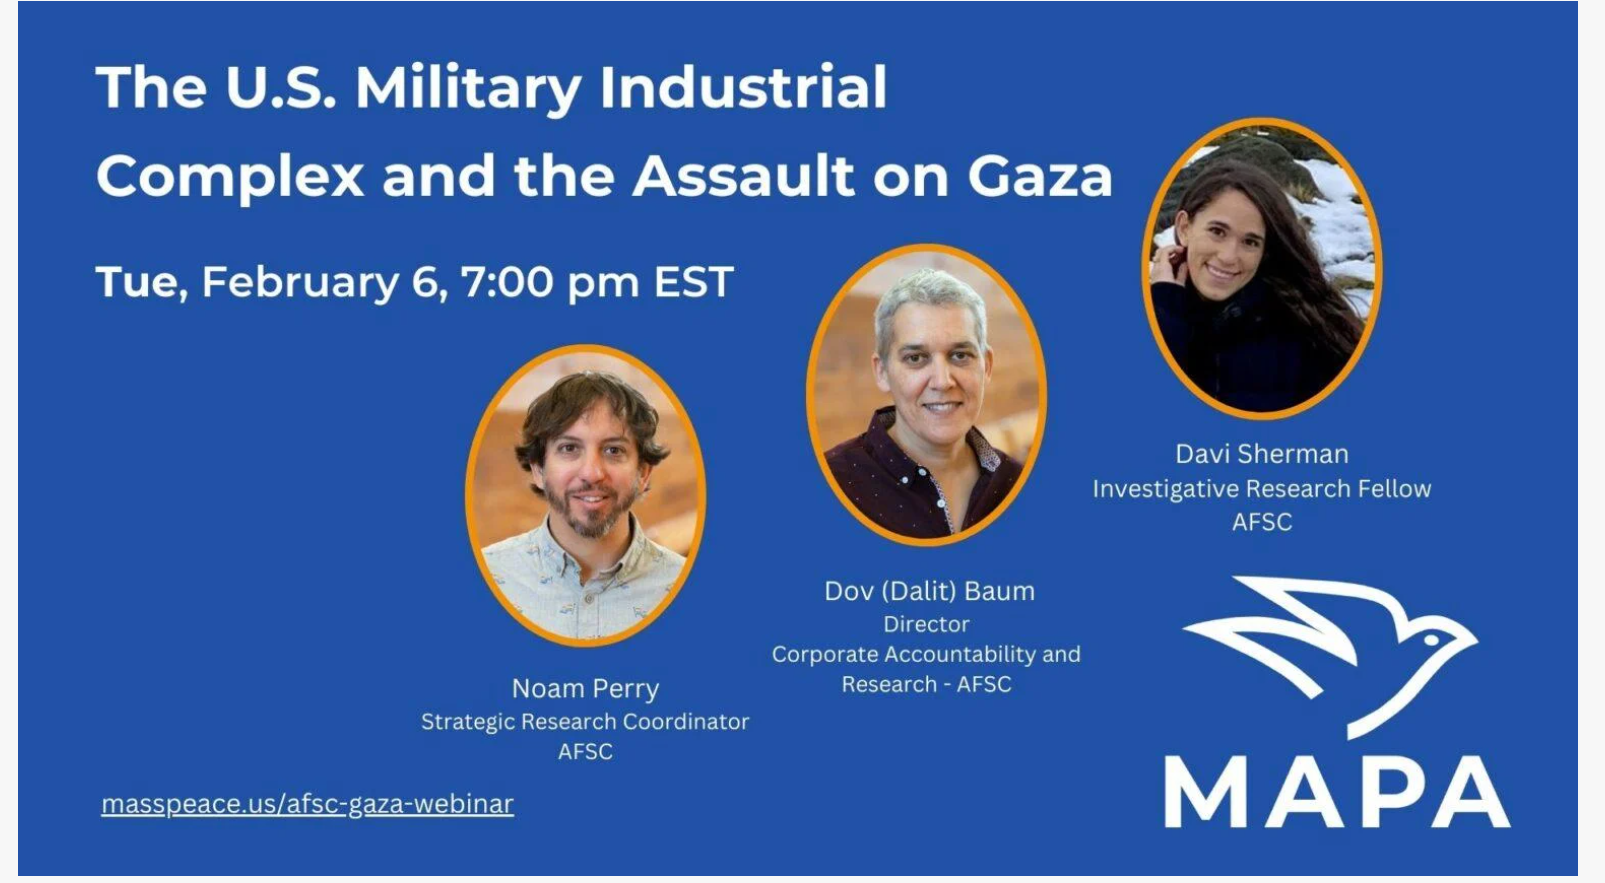 The U.S. Military Industrial Complex and the Assault on Gaza